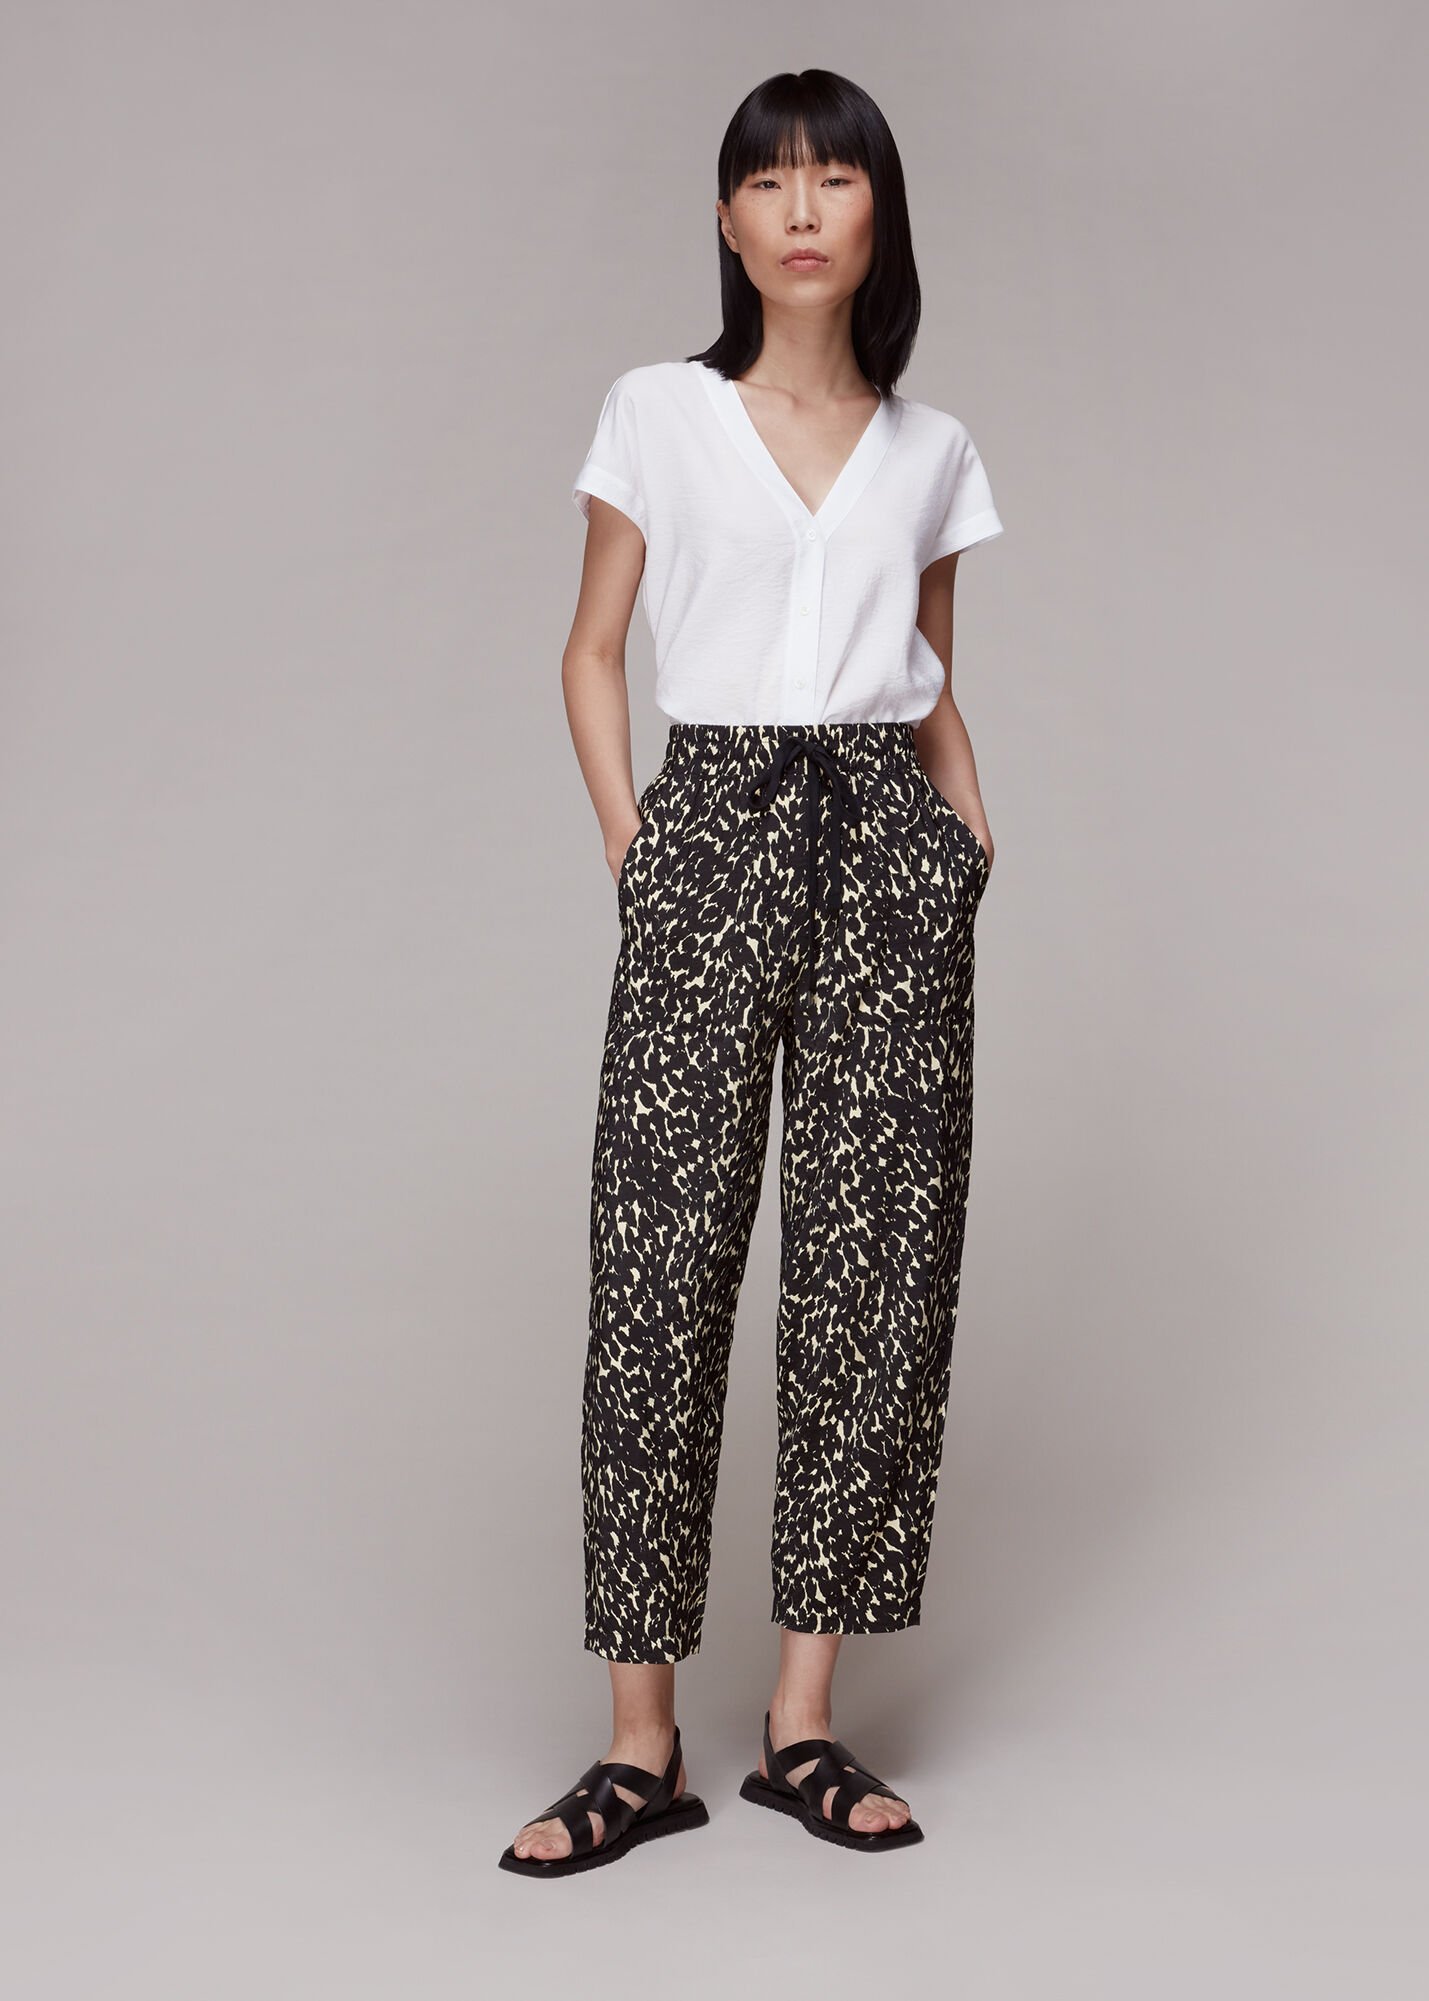 Floral Print Trousers with Insert Pockets